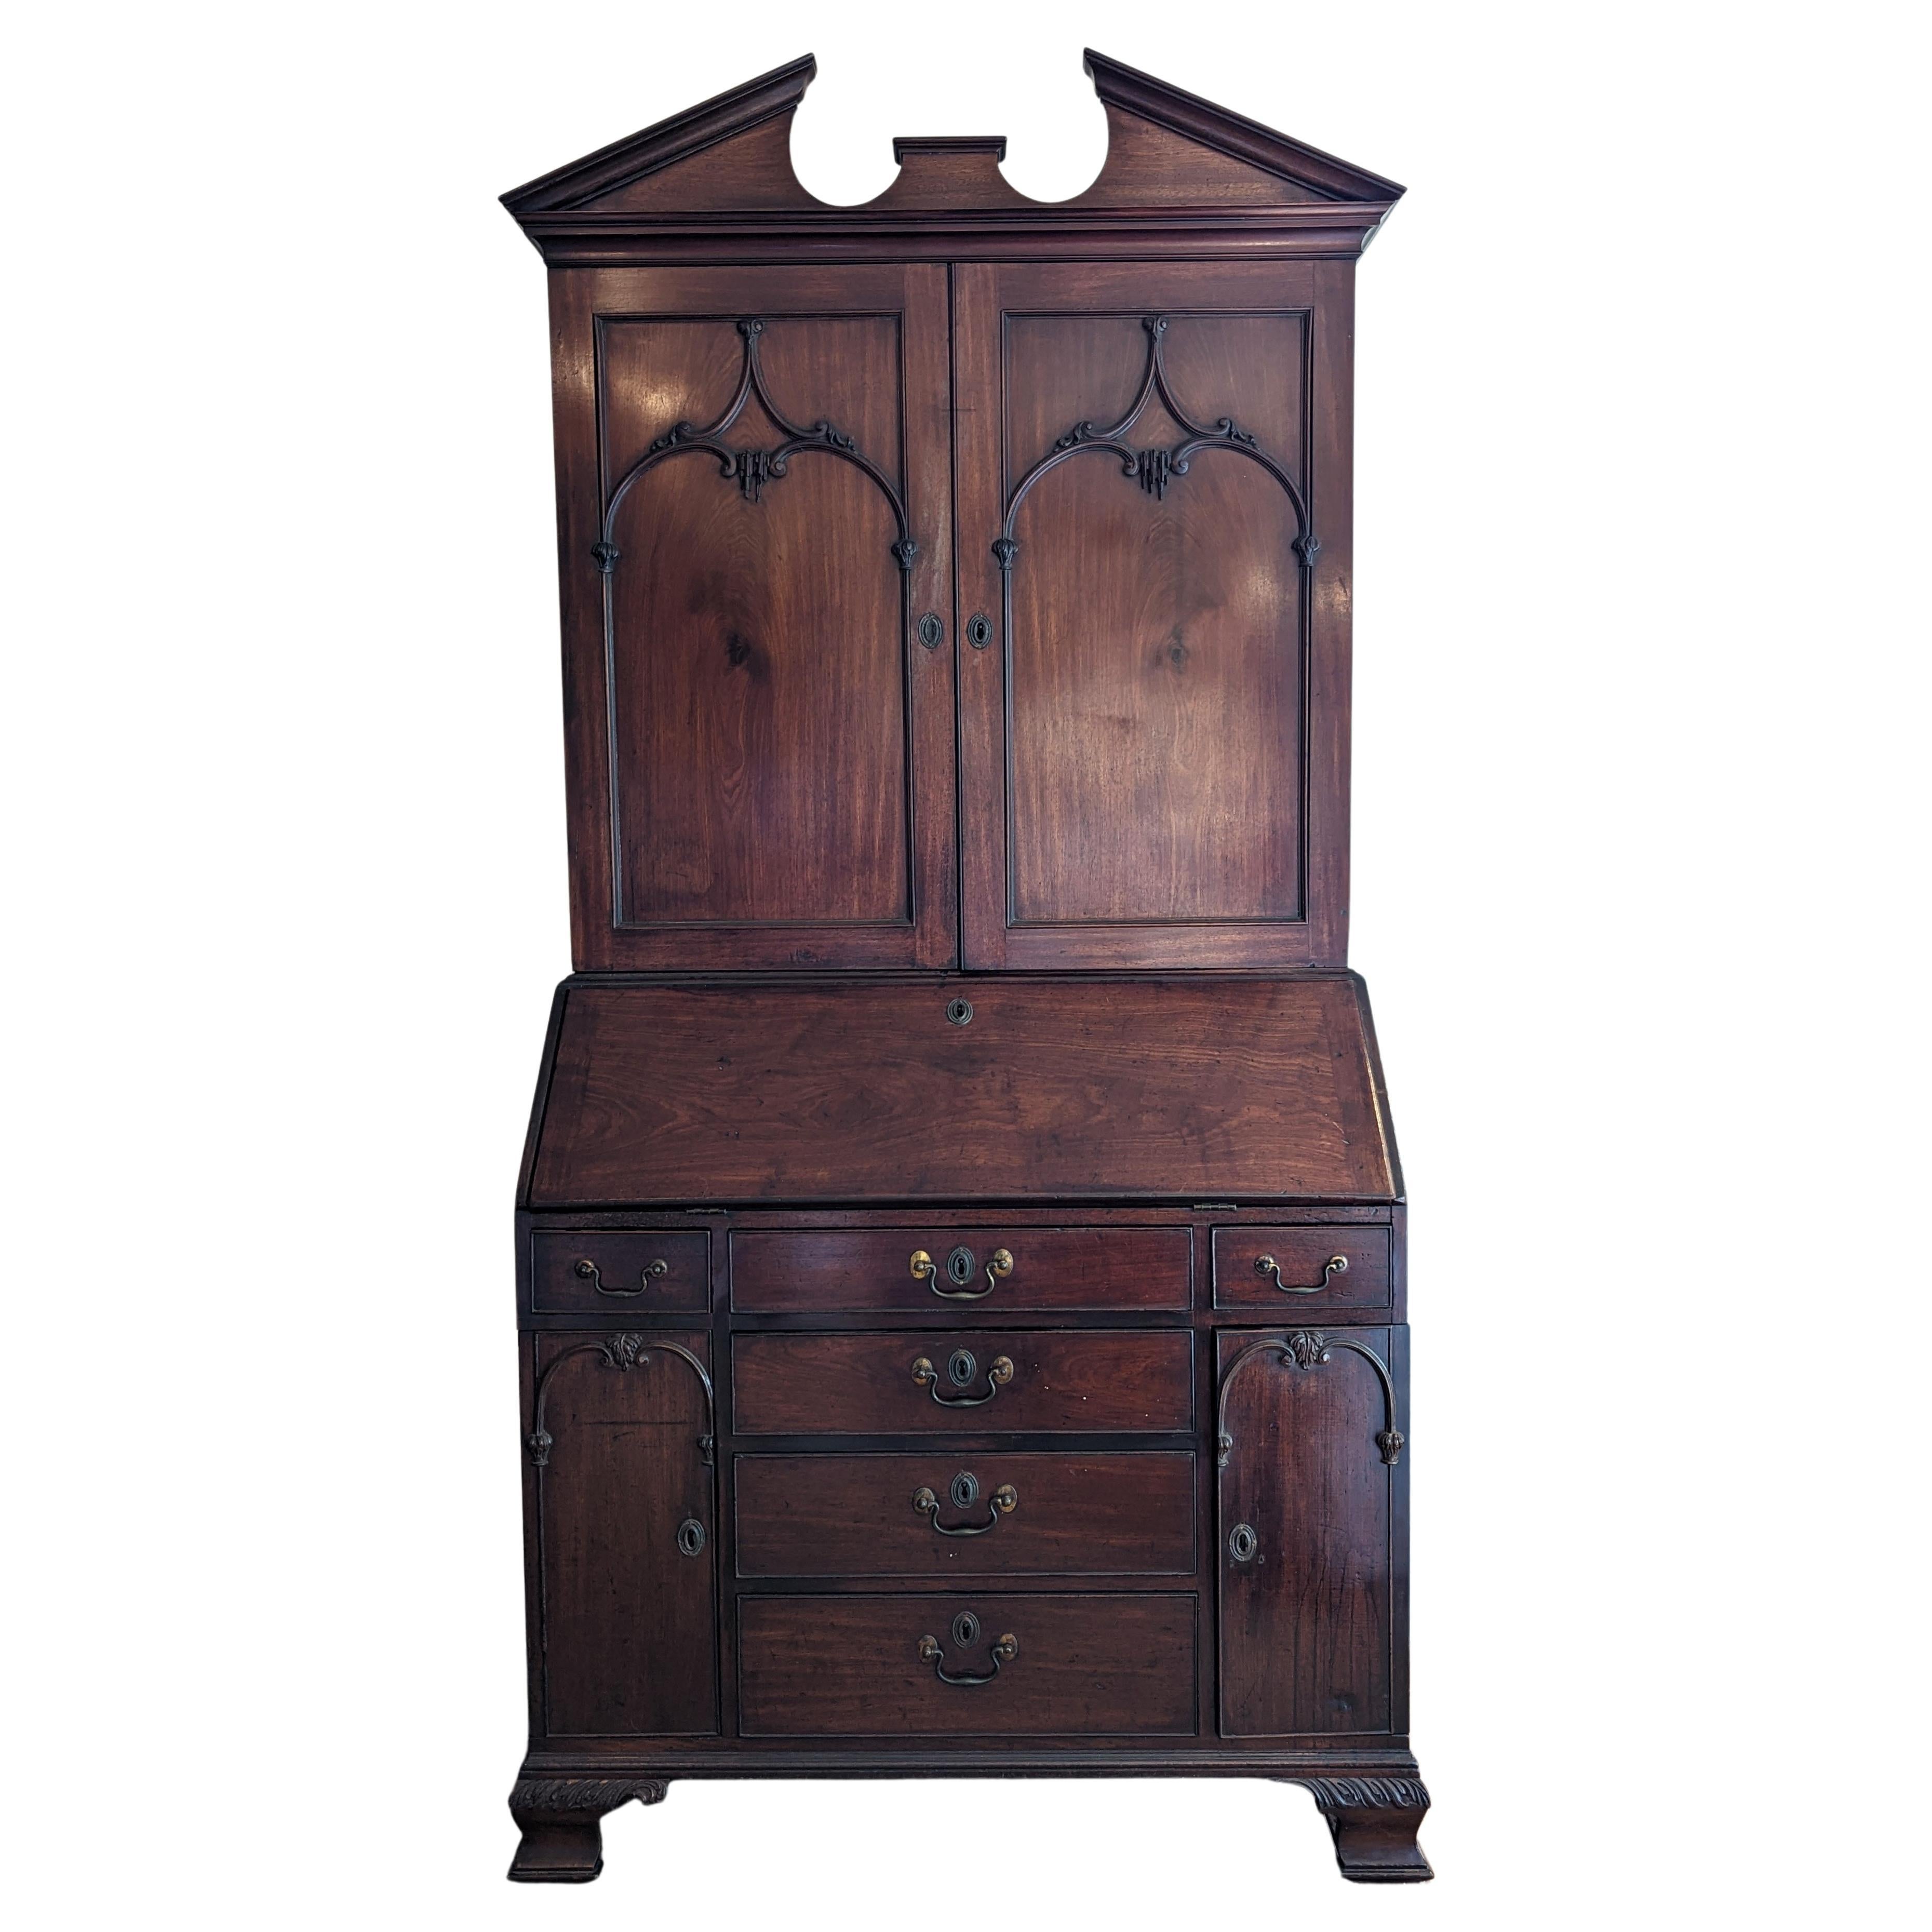 Early Georgian Chippendale Bureau Bookcase Desk in Carved Mahogany For Sale